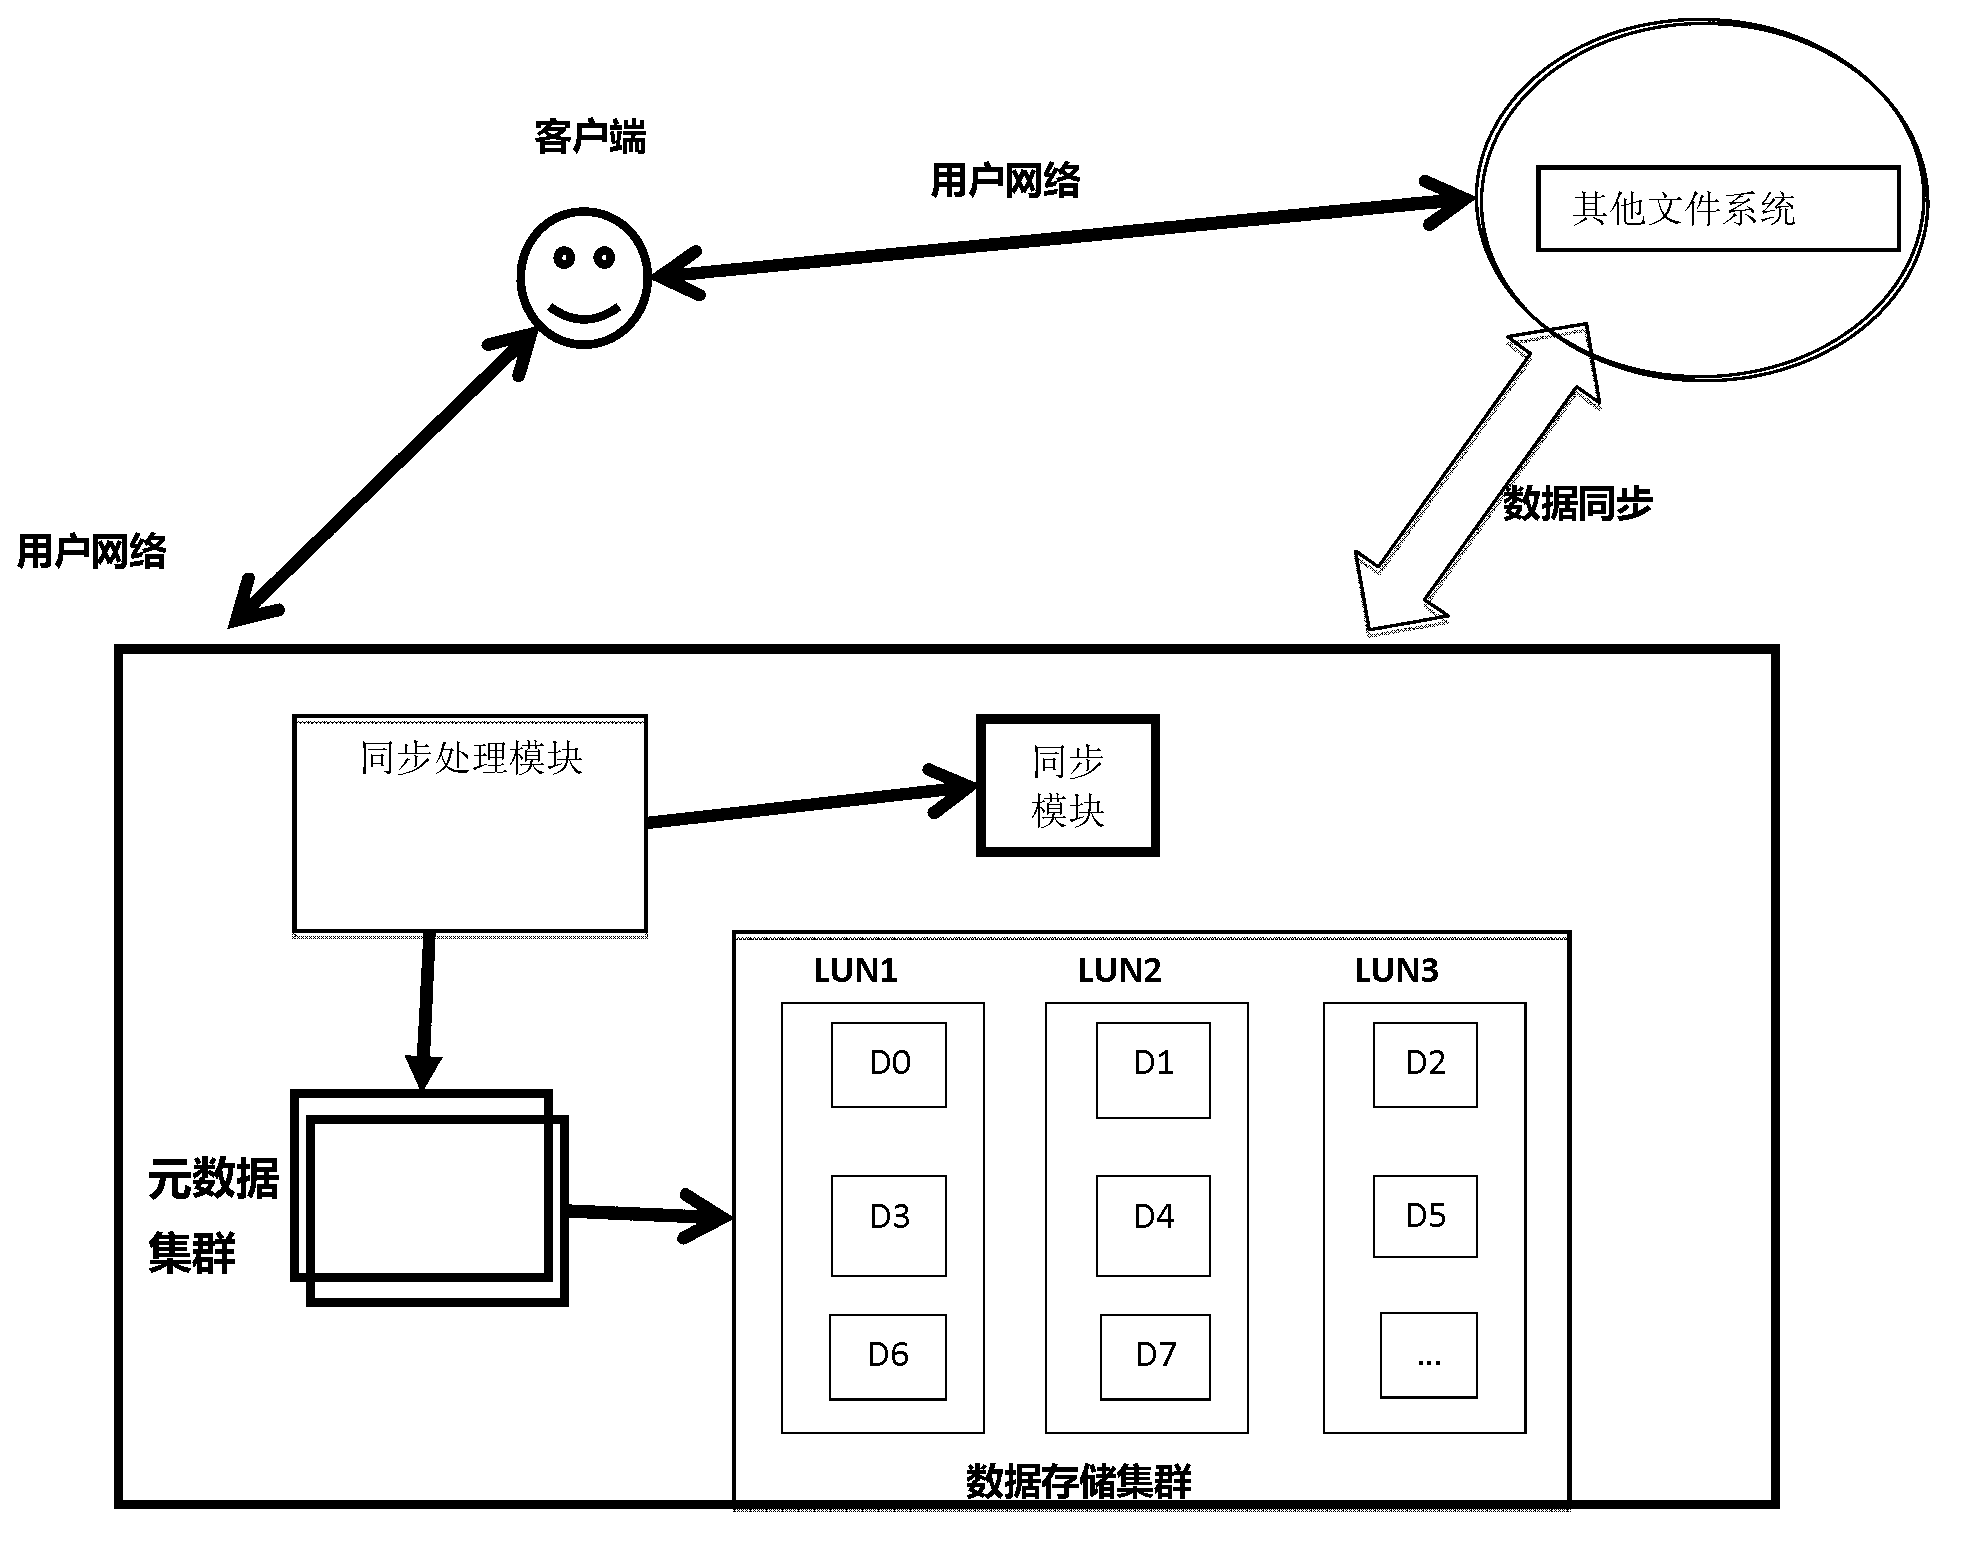 Data synchronization method of distributed file systems and file systems